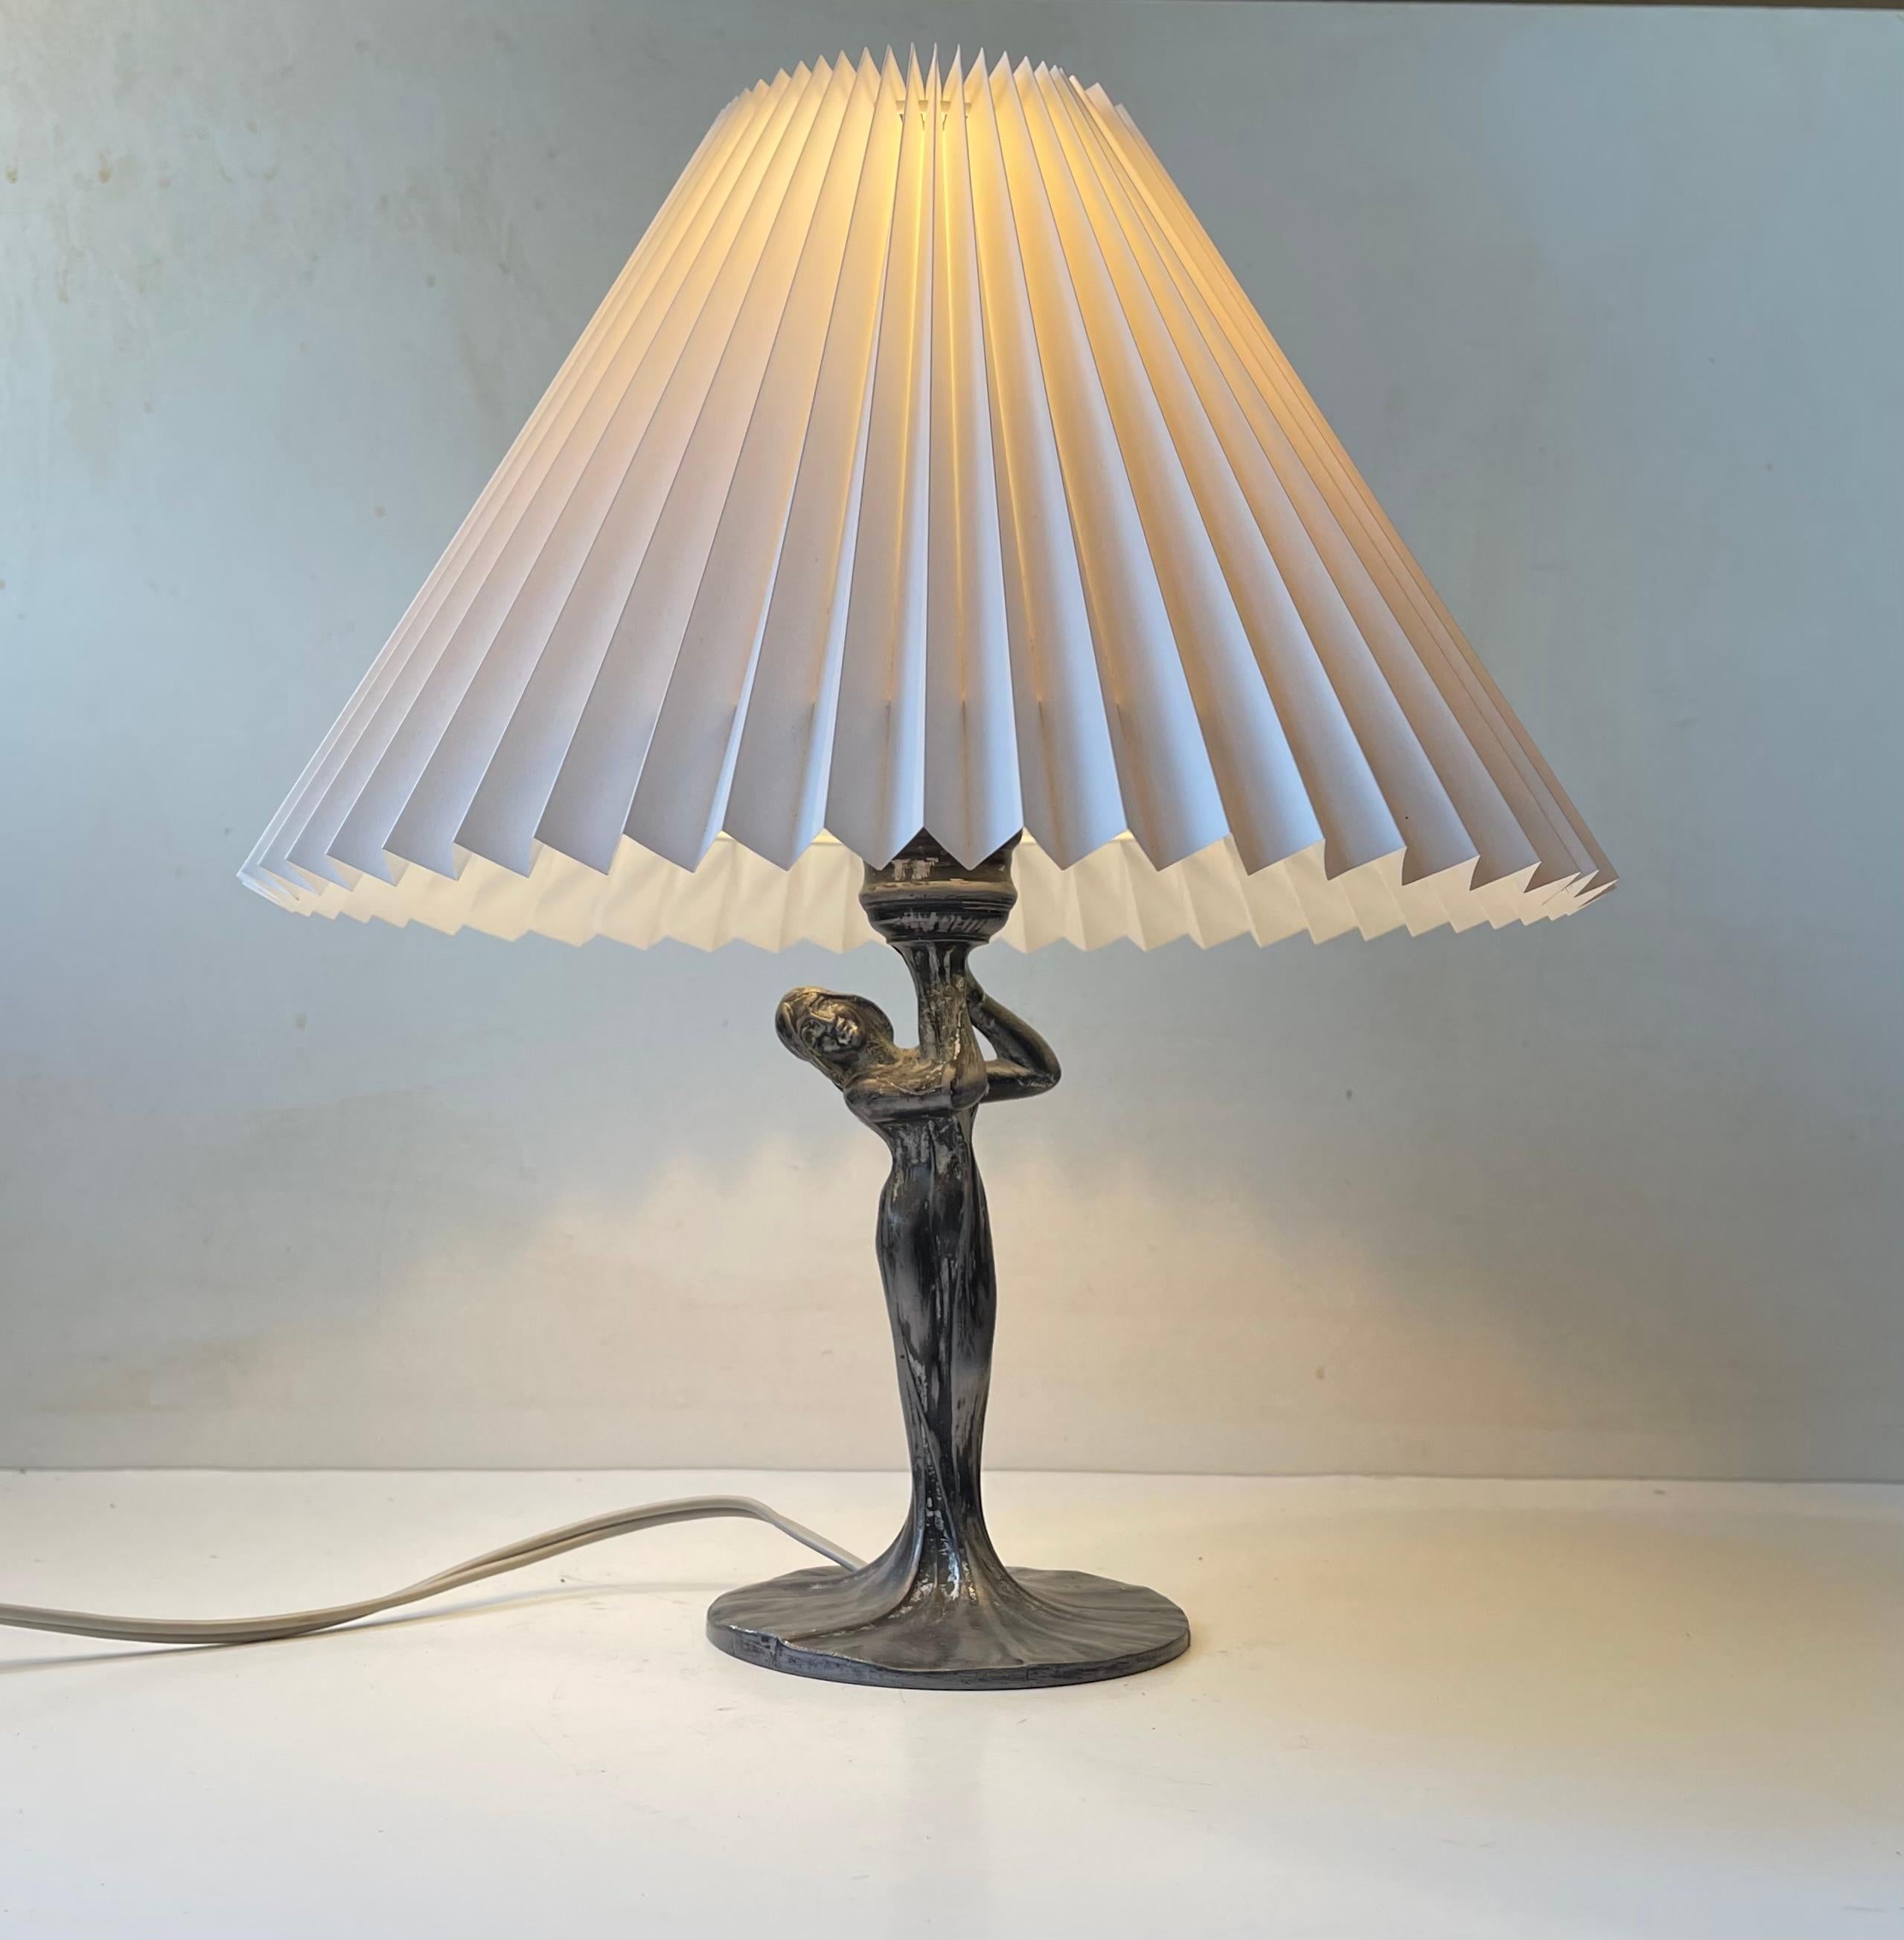 French Art Deco 'Dress' Table Lamp in Pewter, 1930s For Sale 3